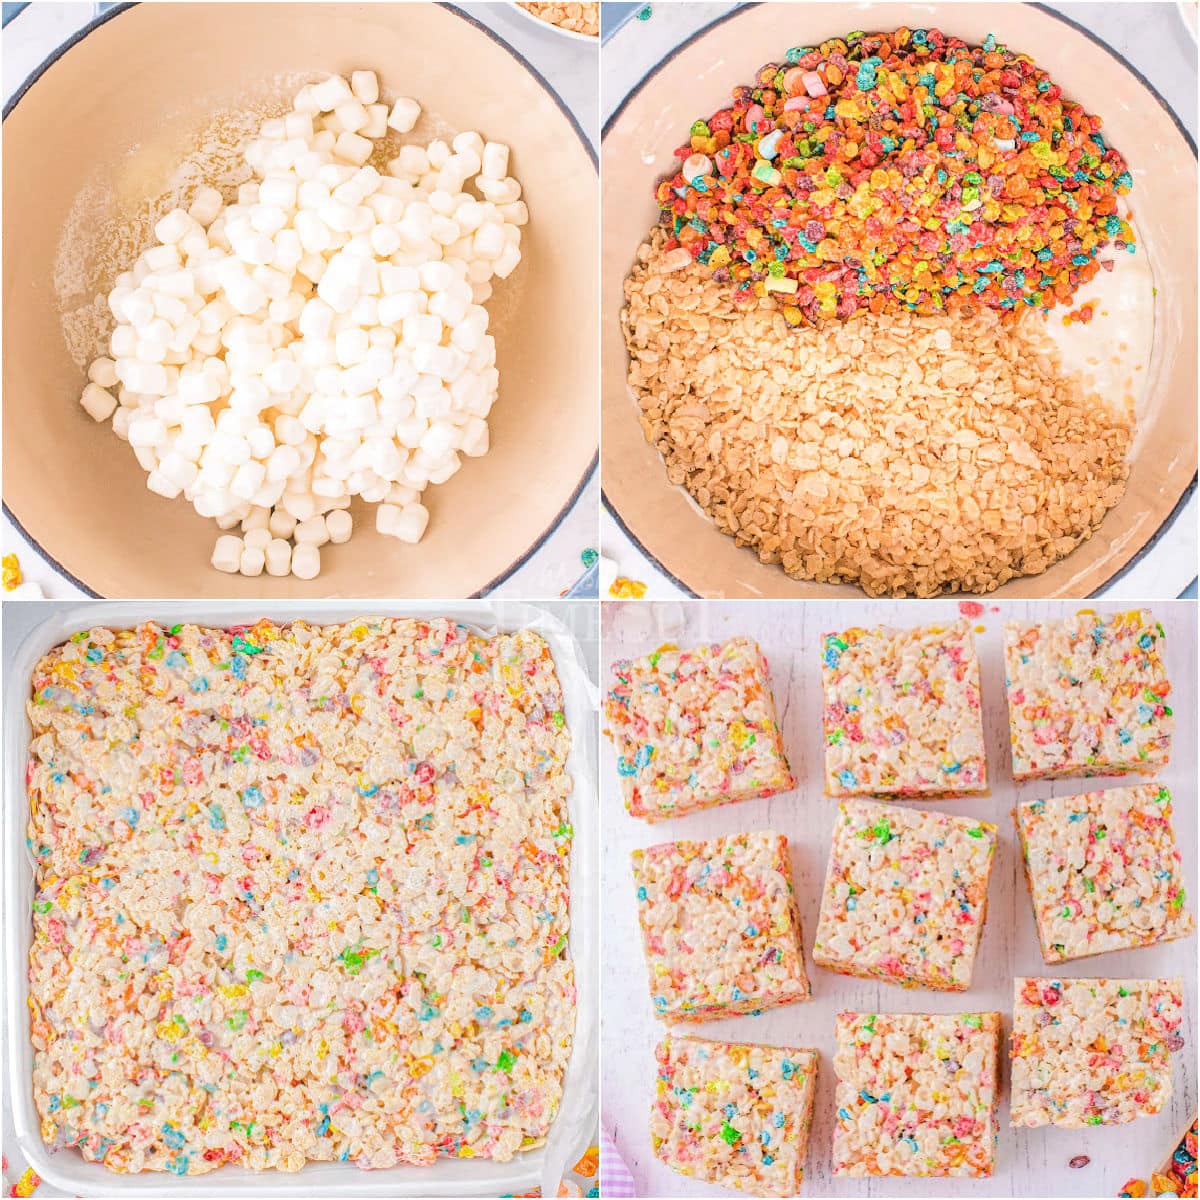 four image collage showing how to make rainbow rice krispie treats step by step.